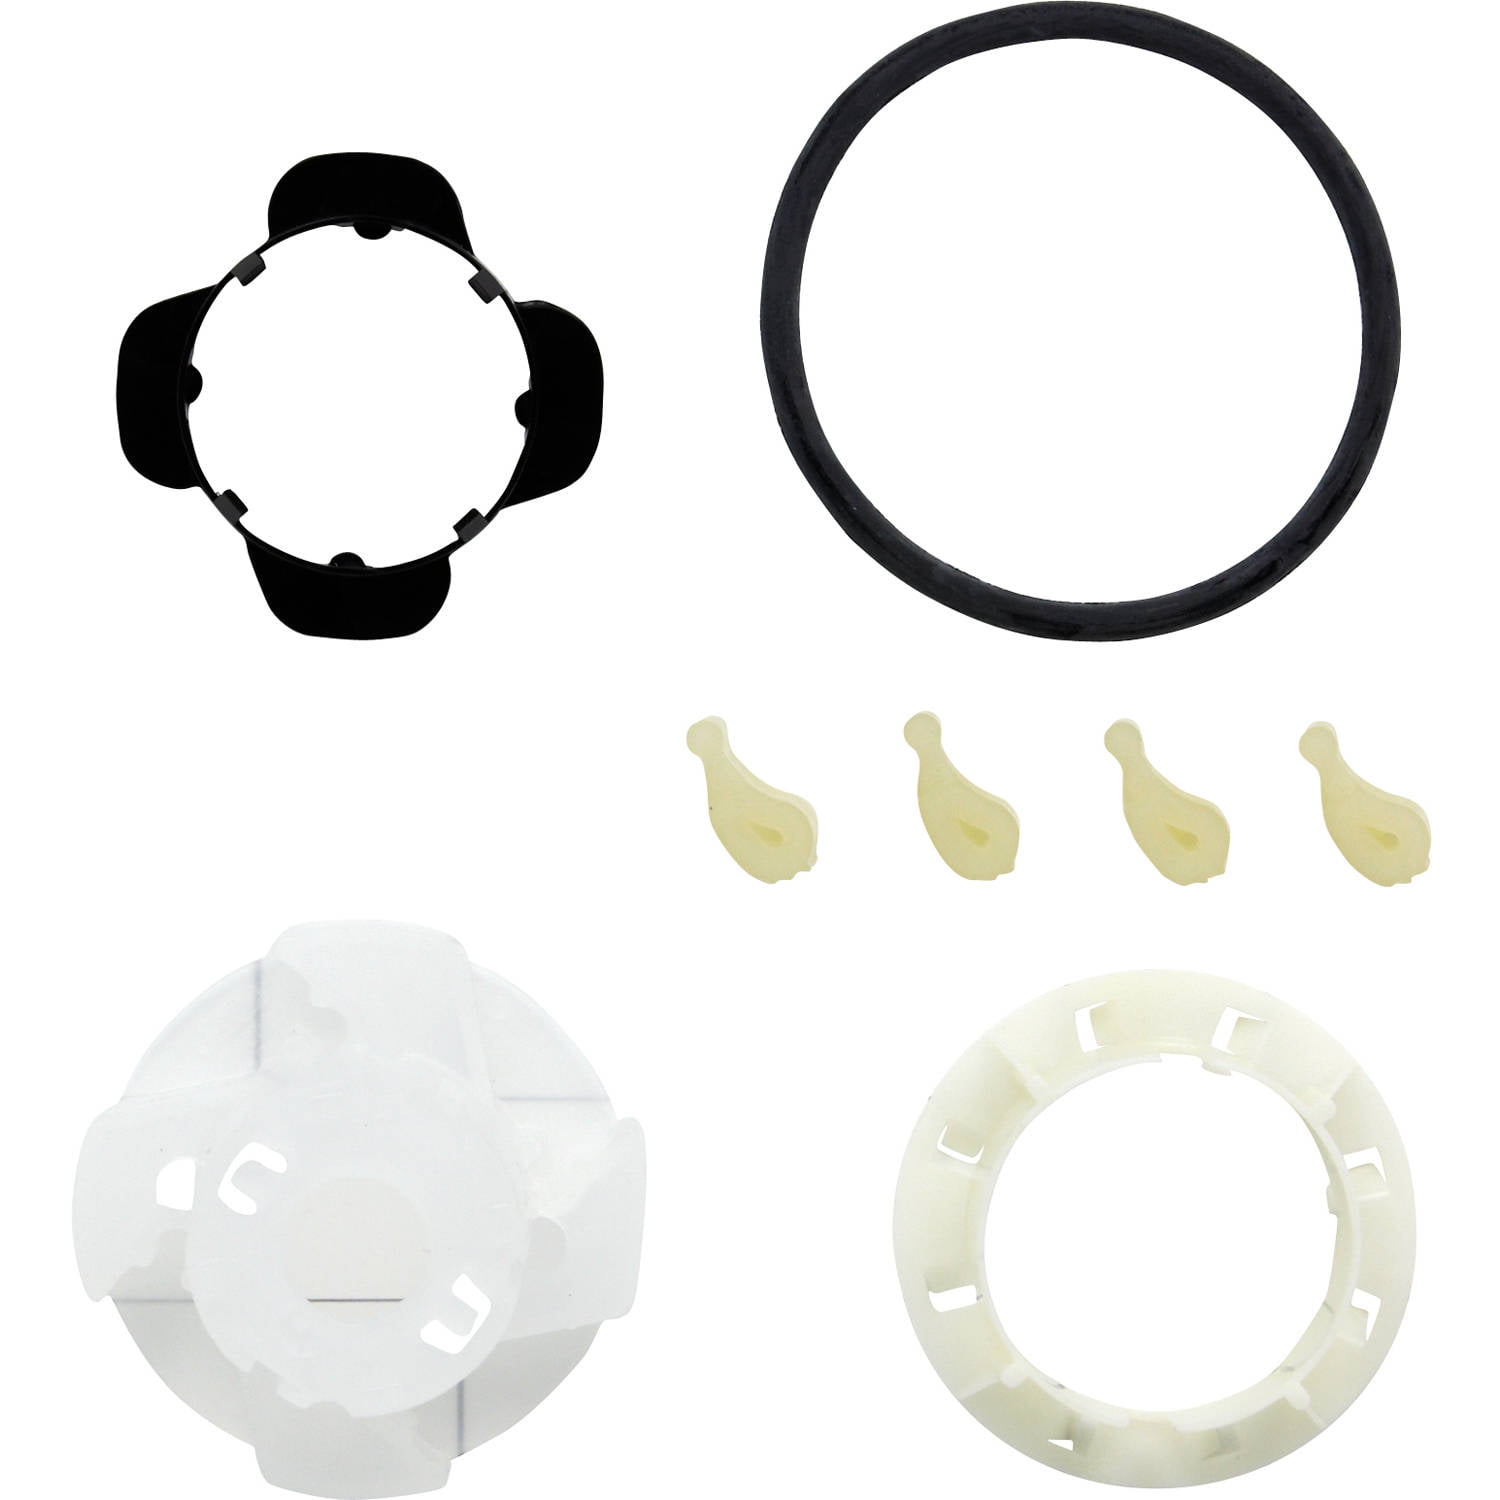 4 Pieces 80040 Washer Agitator Dogs Replacement for Kenmore/Sears 11092573800 Washing Machine UpStart Components Brand Compatible with 80040 Agitator Dogs